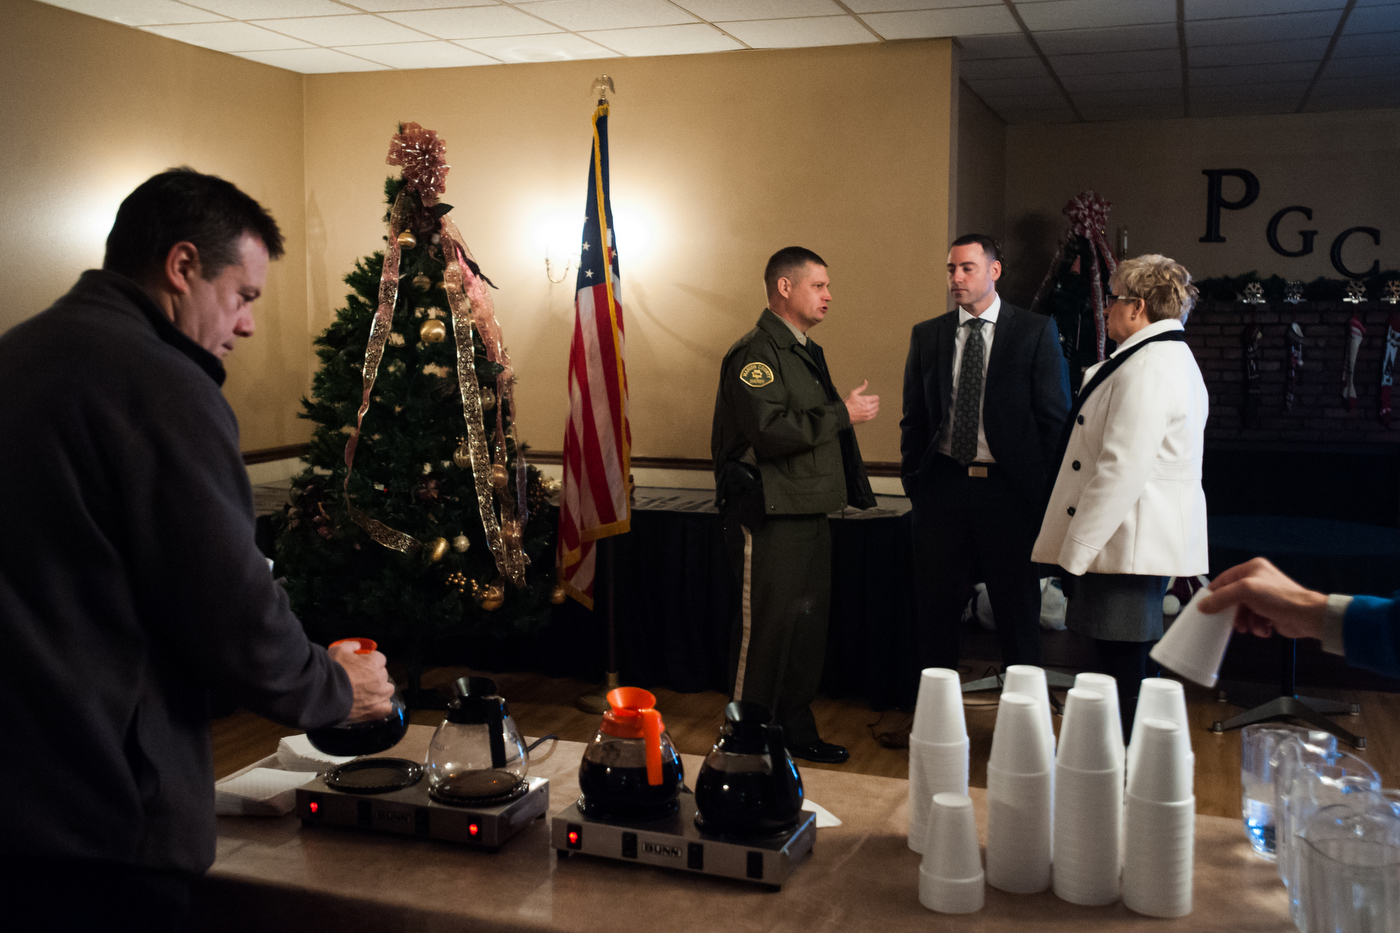  Attendees, including the local sheriff, mingle before Republican U.S. presidential candidate Marco Rubio's town hall event in Pella, Iowa on December 30, 2015. 